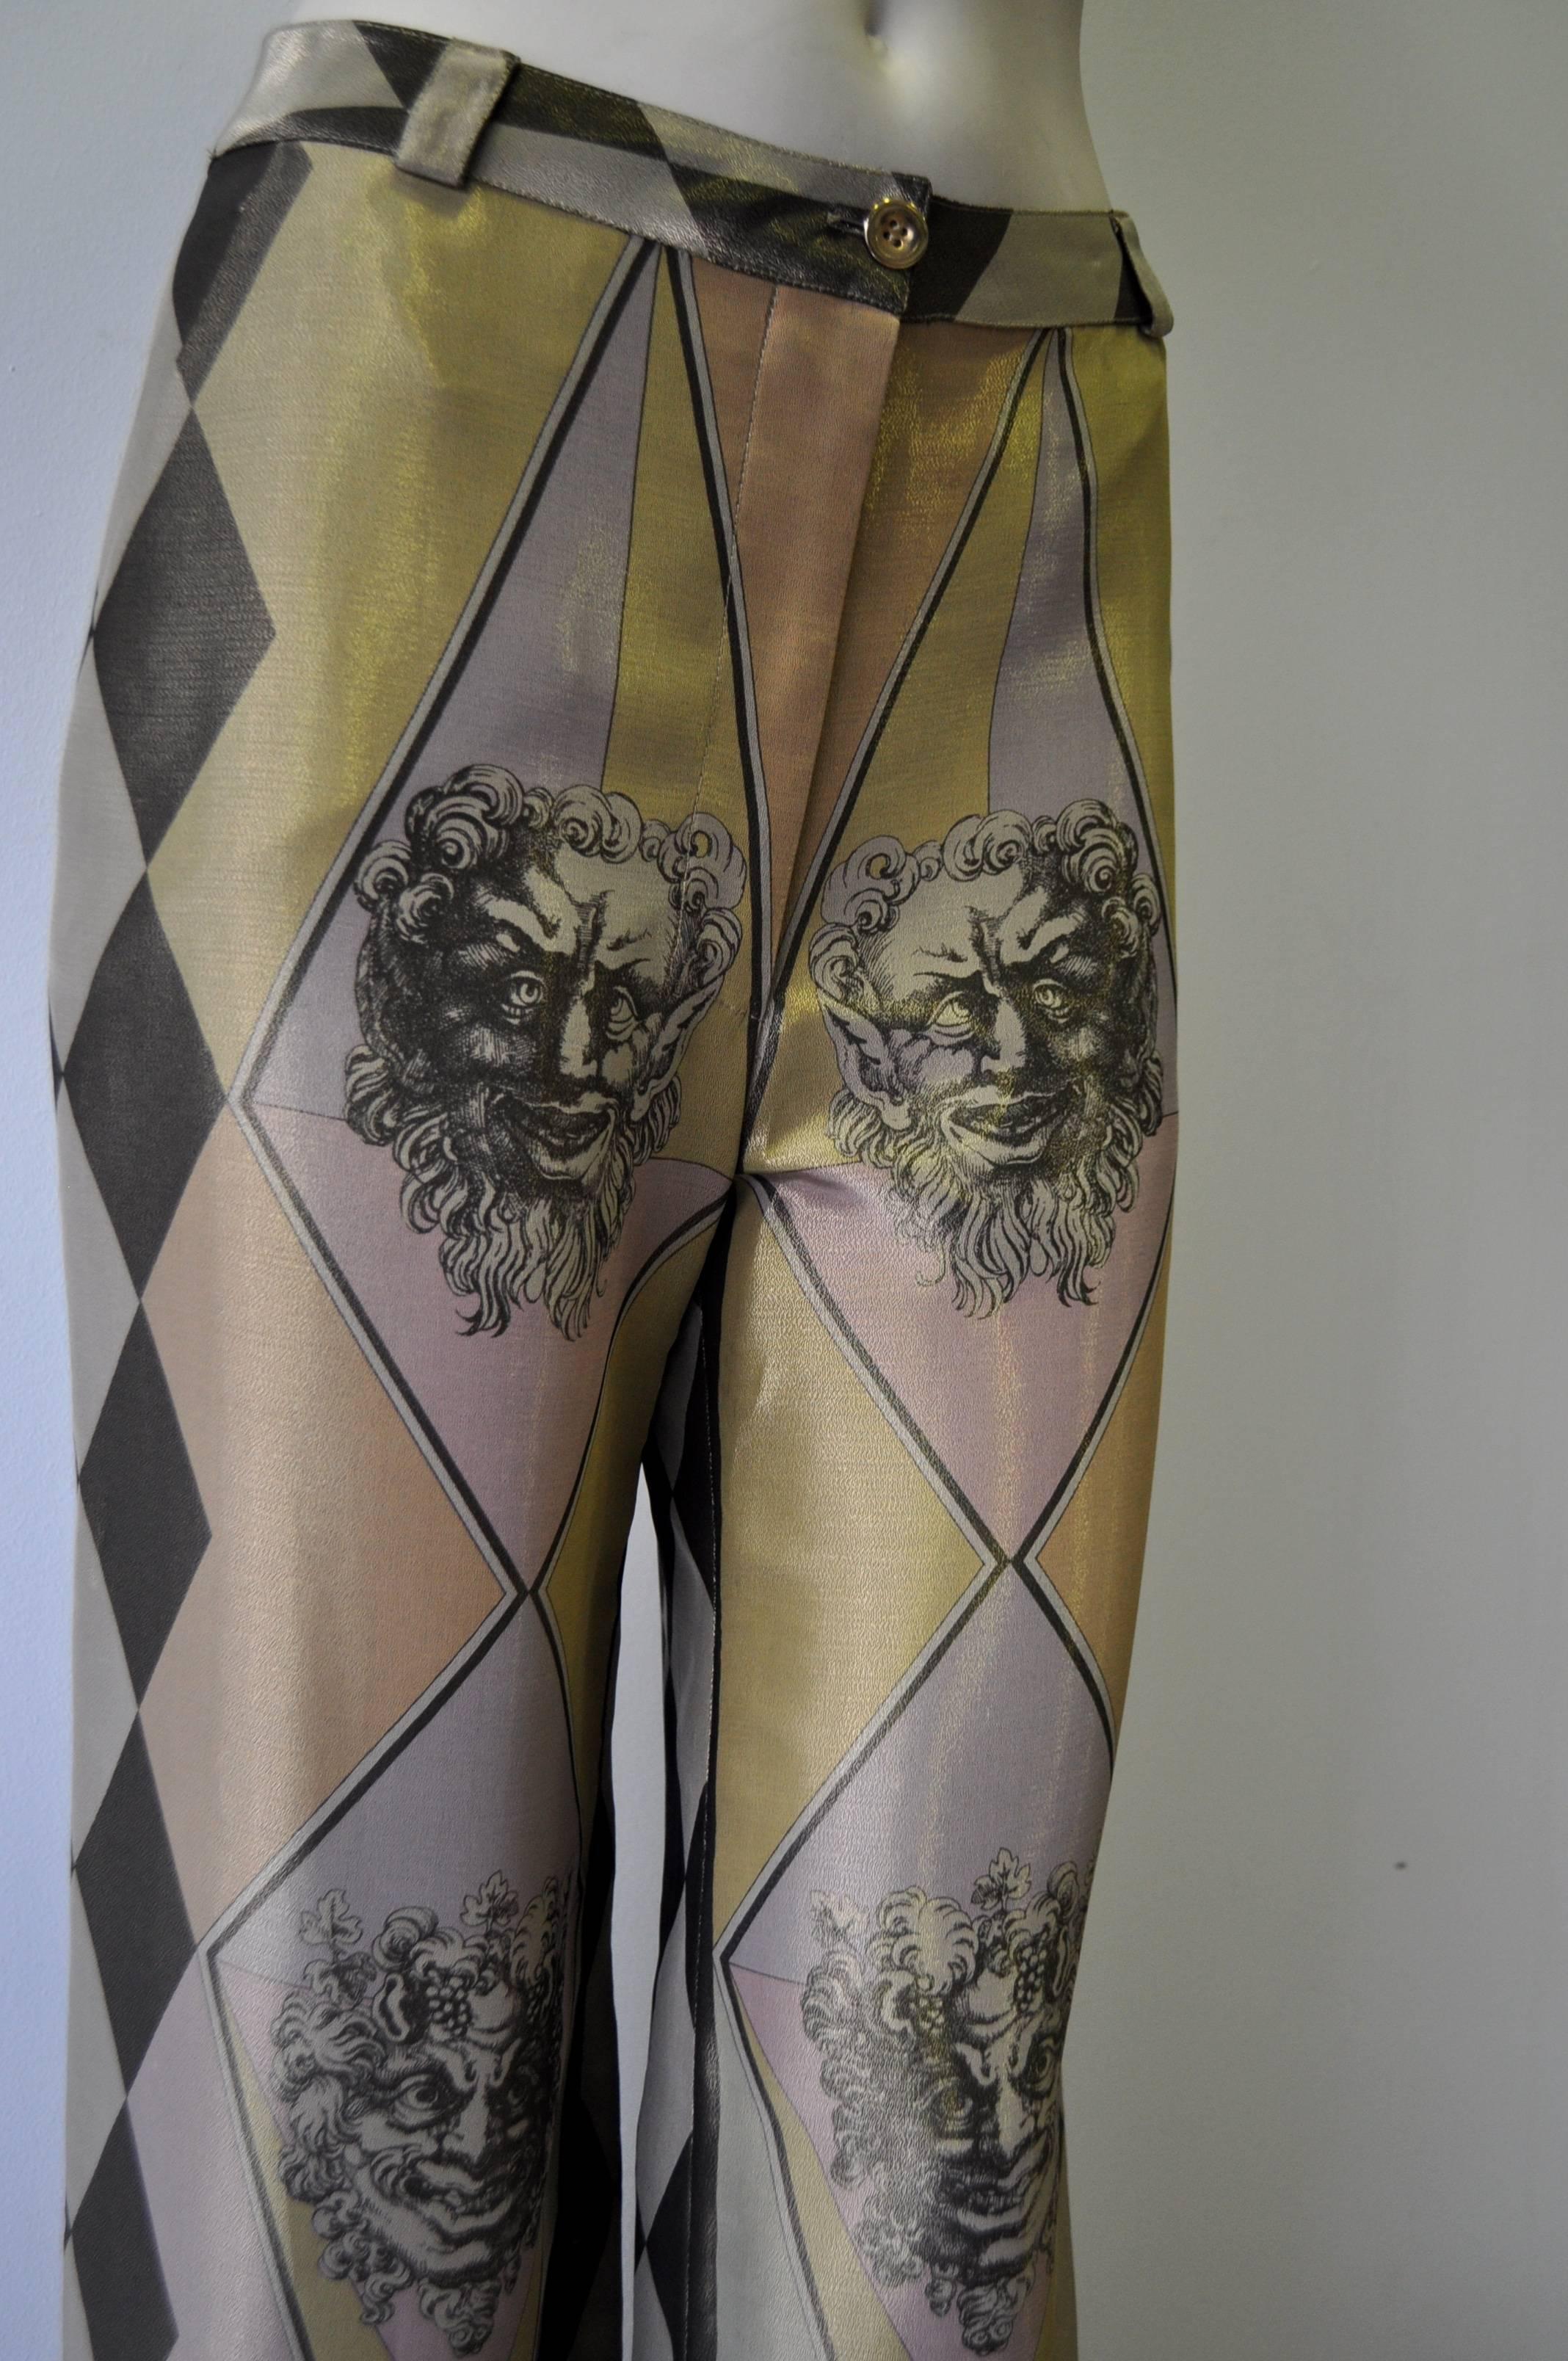 Very Rare Gianni Versace Couture Silk Lame Harlequin Print Palazzo Pants,
Spring 1992 Collection